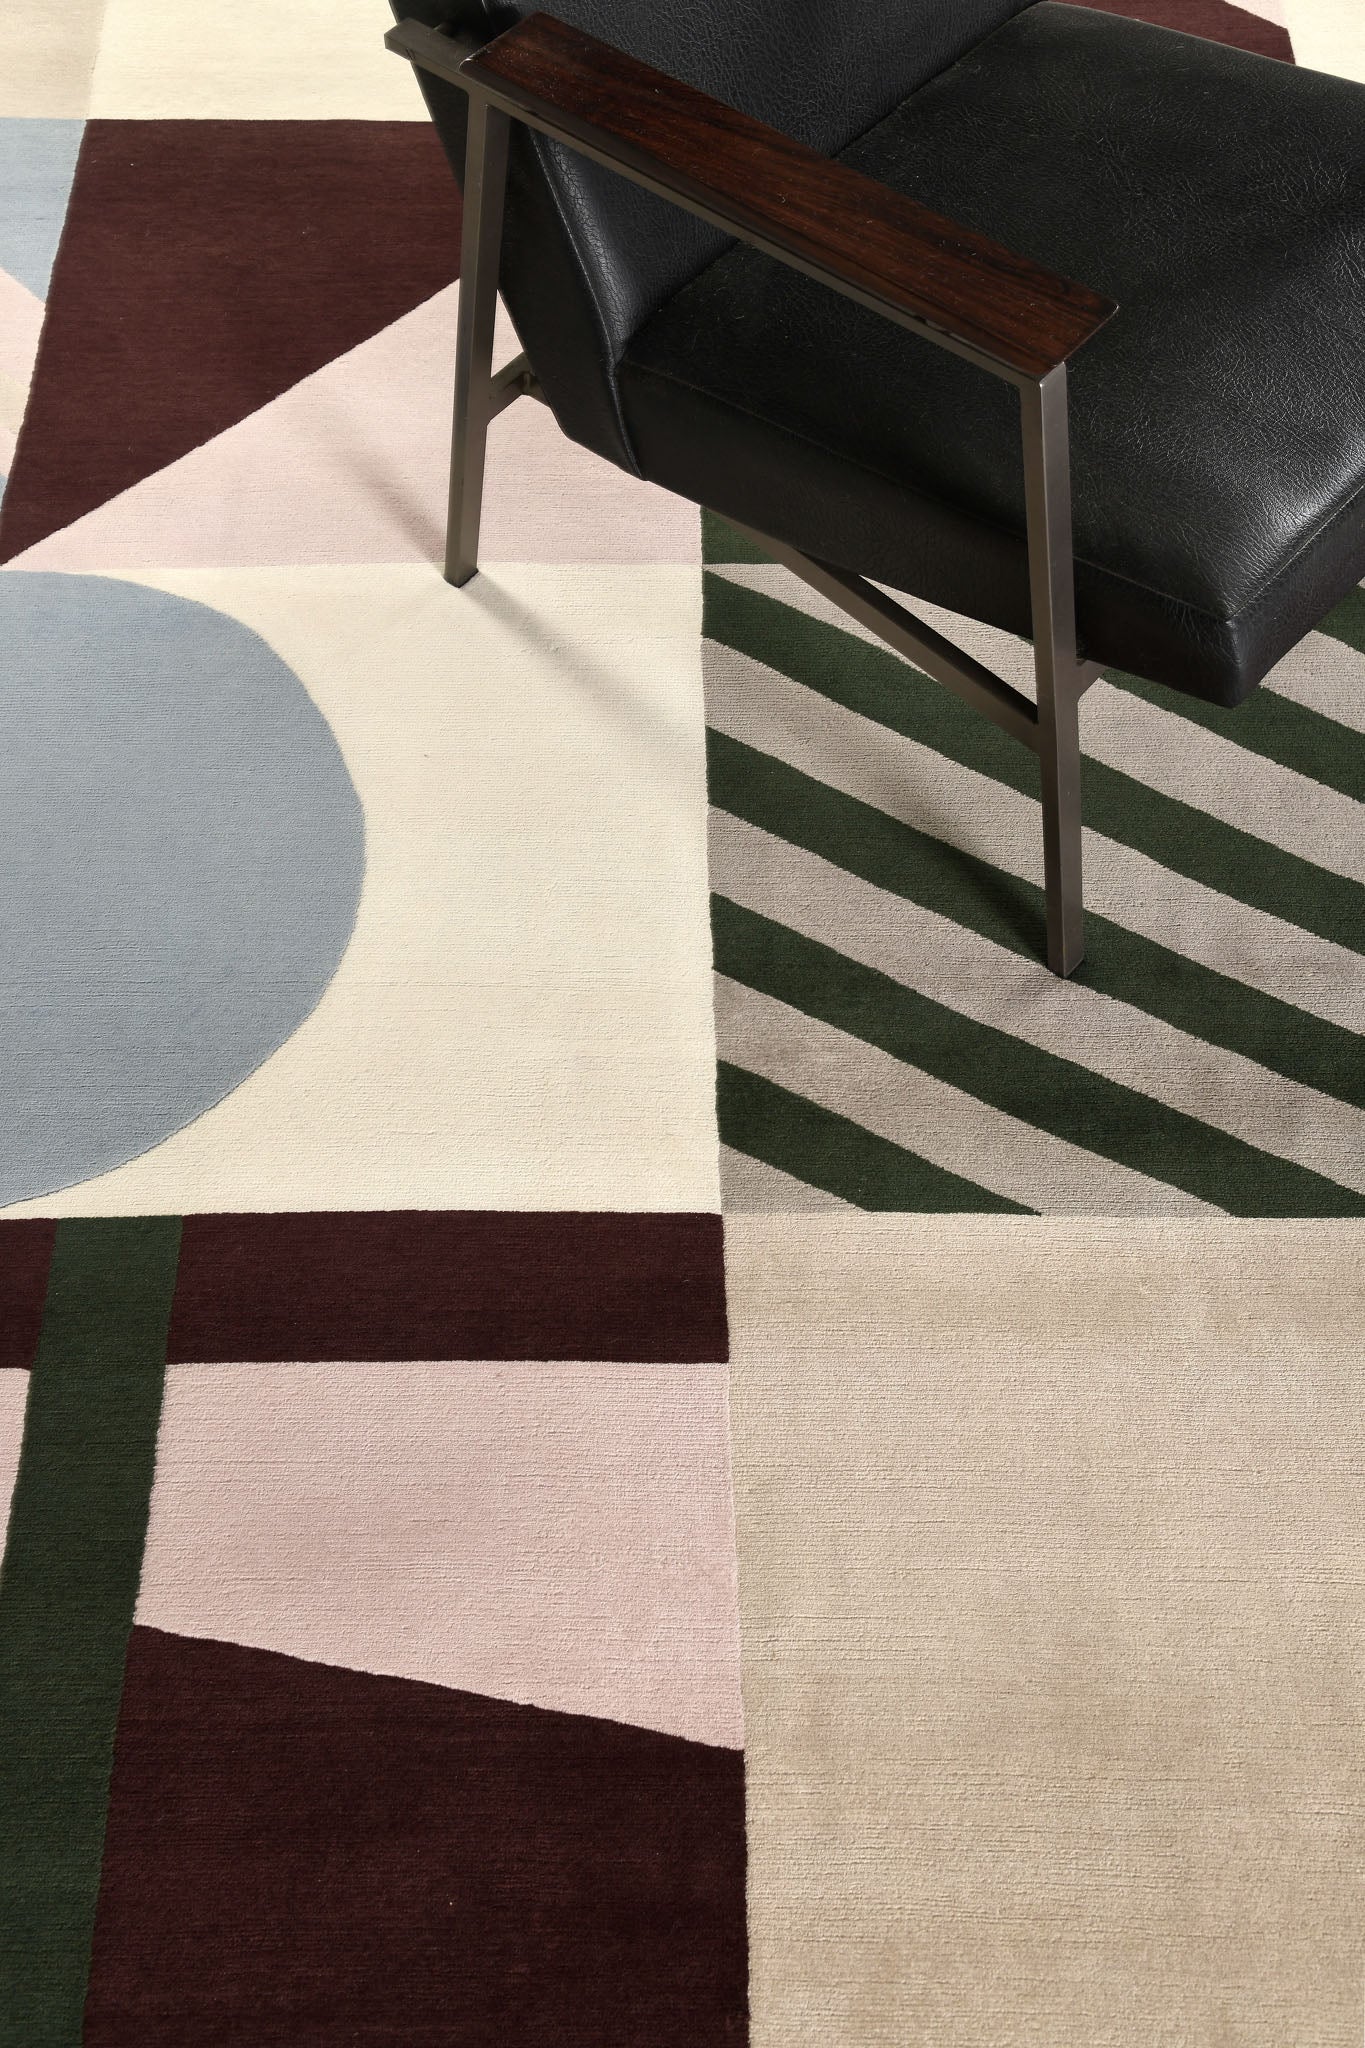 Modern Rug Image 9200 Pazzo, Baci Collection by Citizen Artist